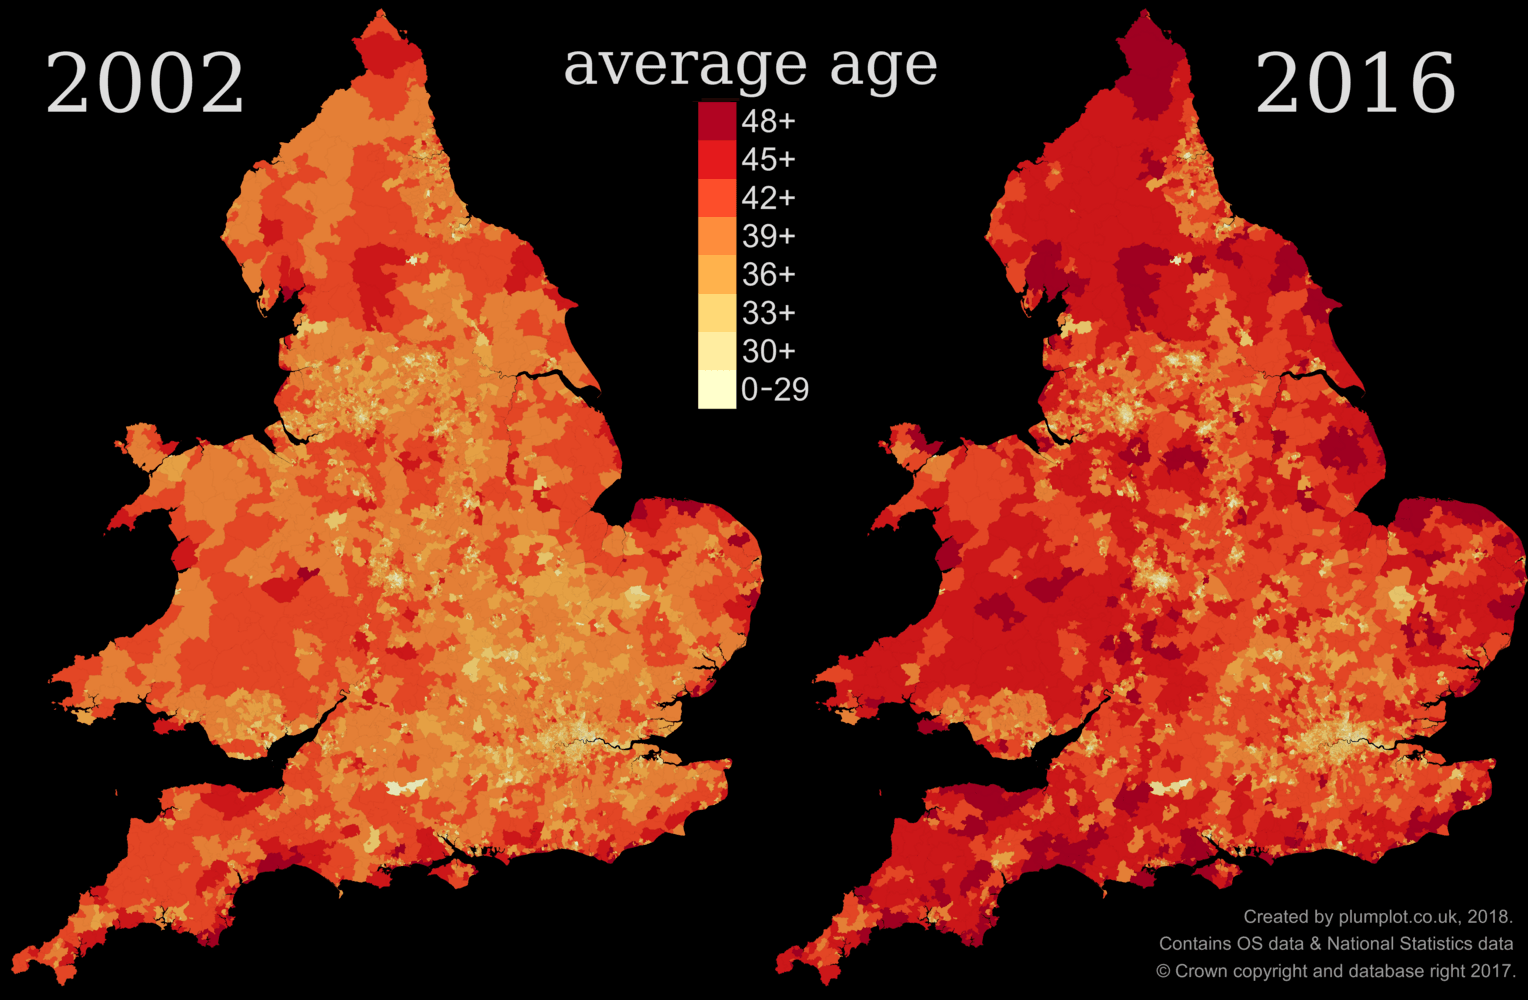 England average age in 2002 compared to 2016